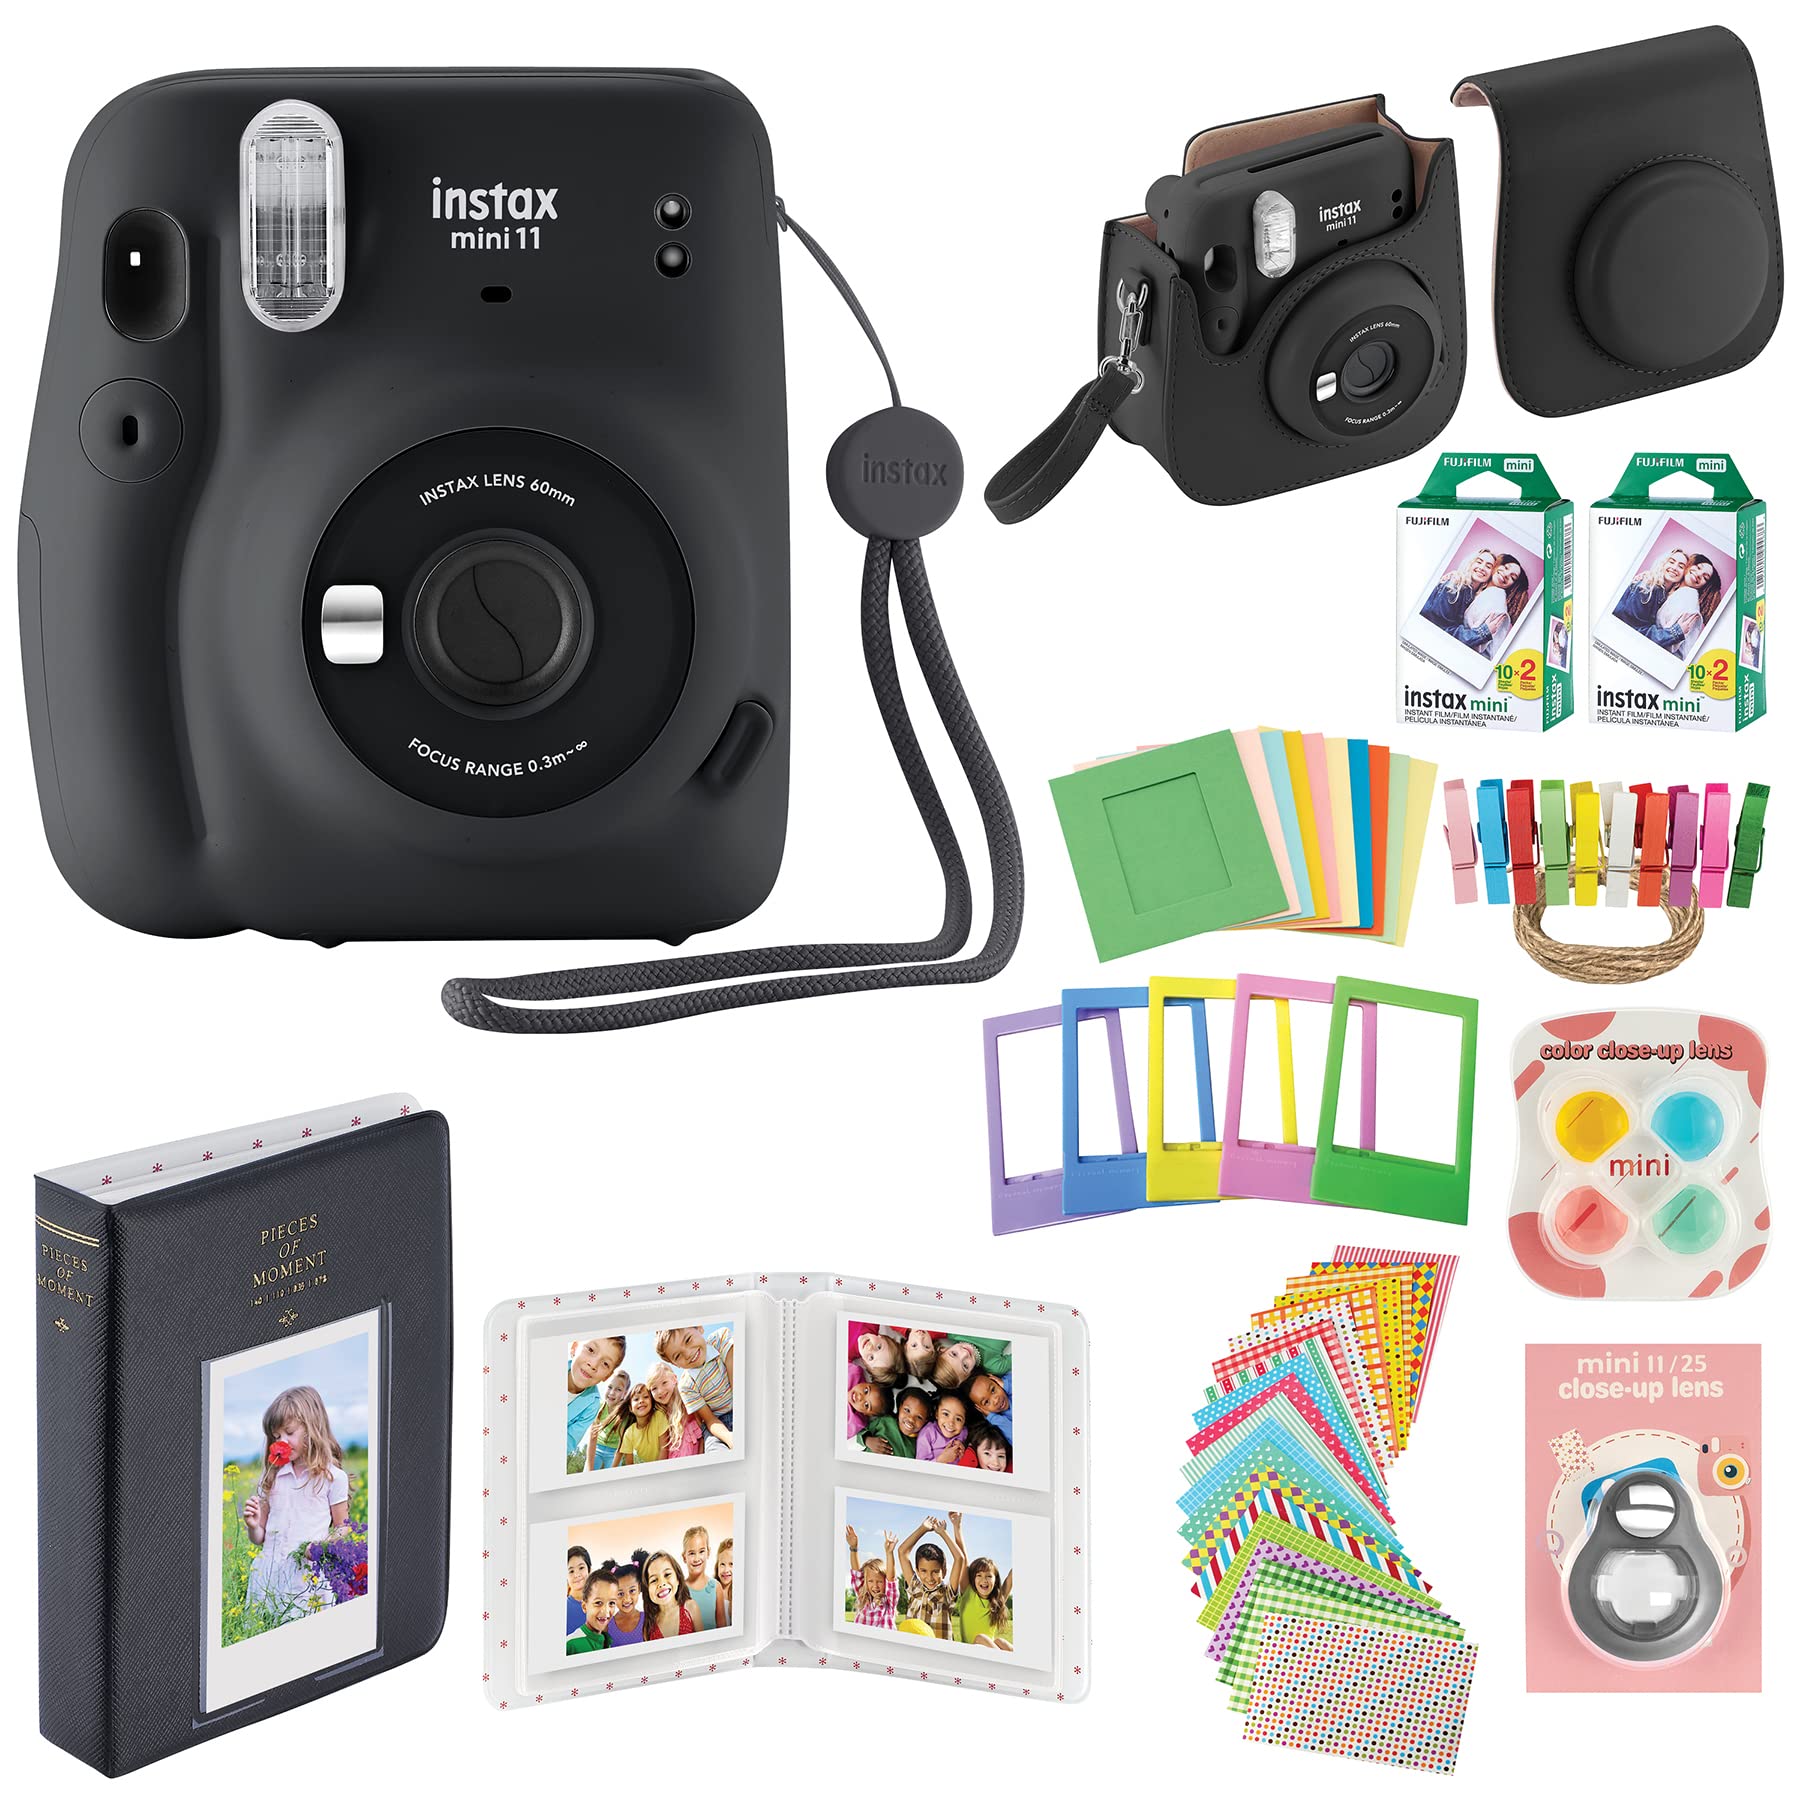 Fujifilm Instax Mini 11 Instant Camera with 40 Fuji Film Prints, Including Case, Album, and Accessory Gift Bundle (Charcoal Grey)